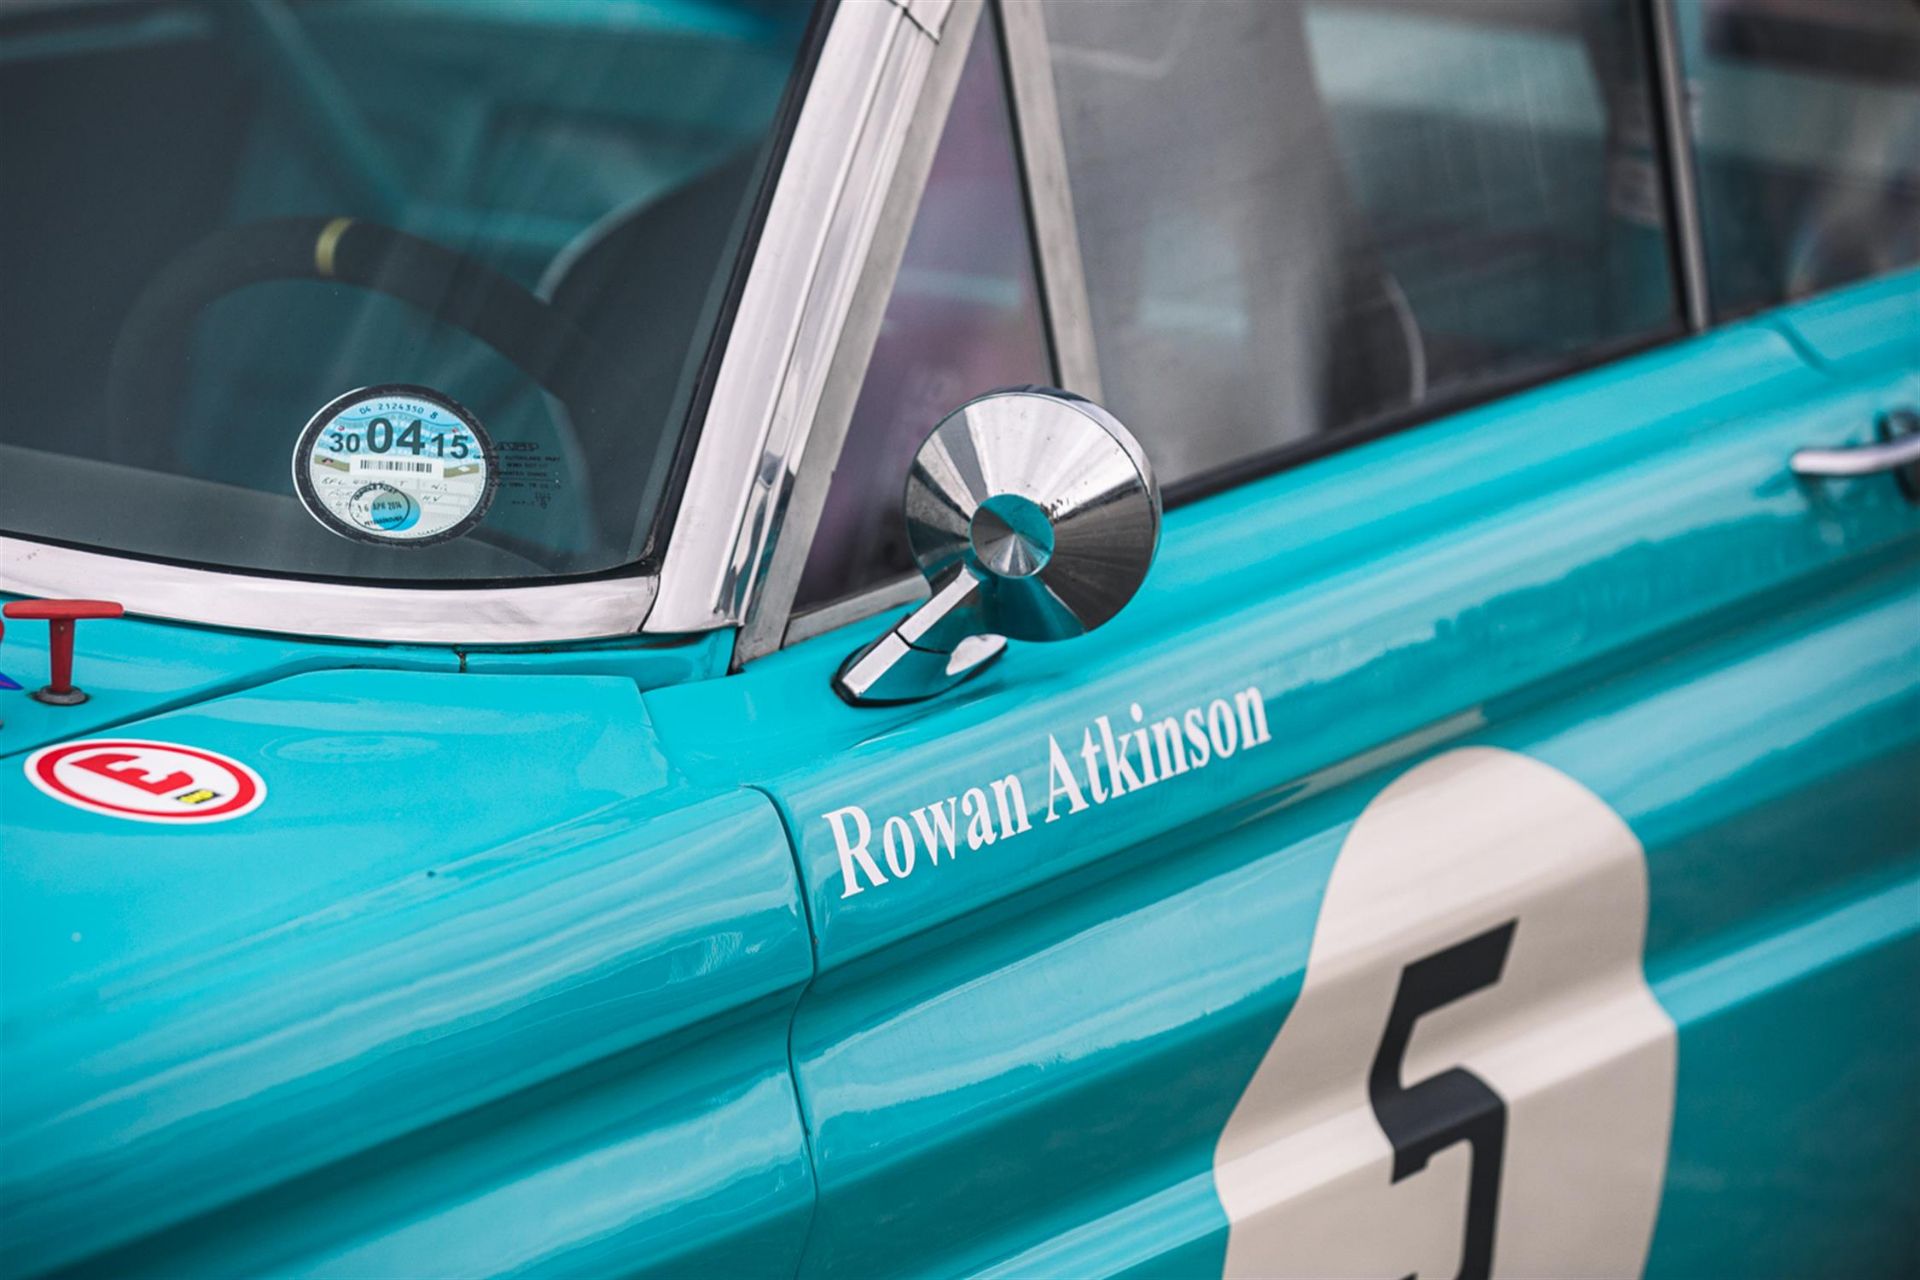 1964 Ford Falcon FIA Race car offered directly from Rowan Atkinson CBE - Image 8 of 10